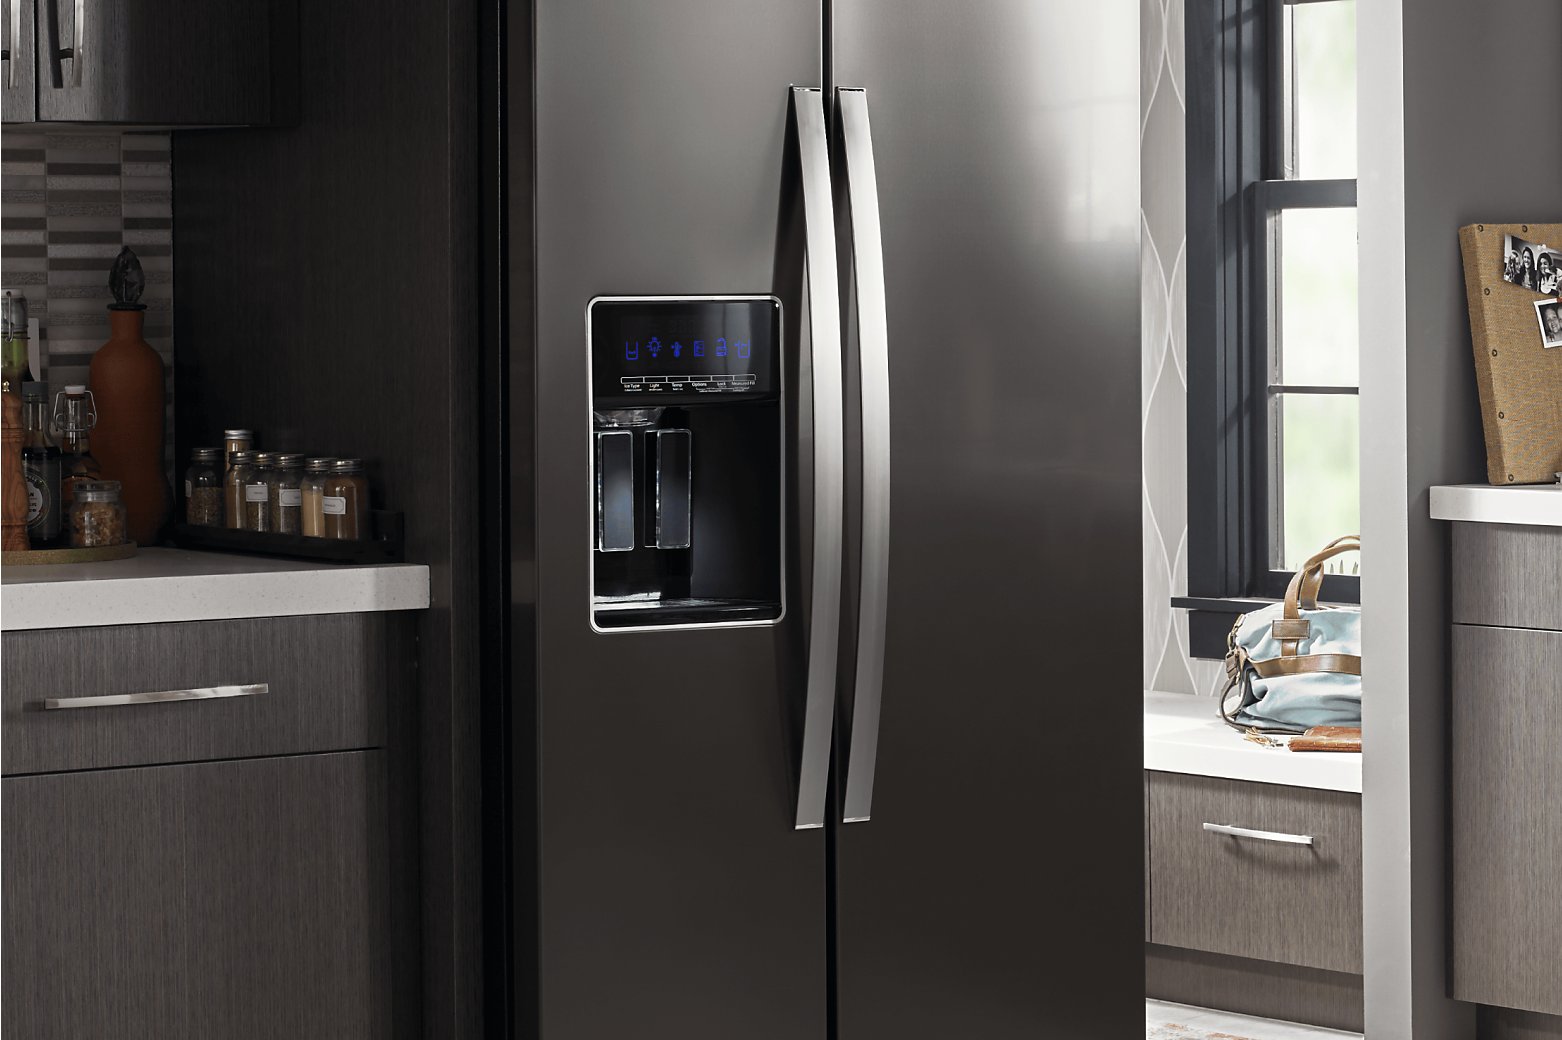 How to Turn Ice Maker on Whirlpool Refrigerator: Quick Guide